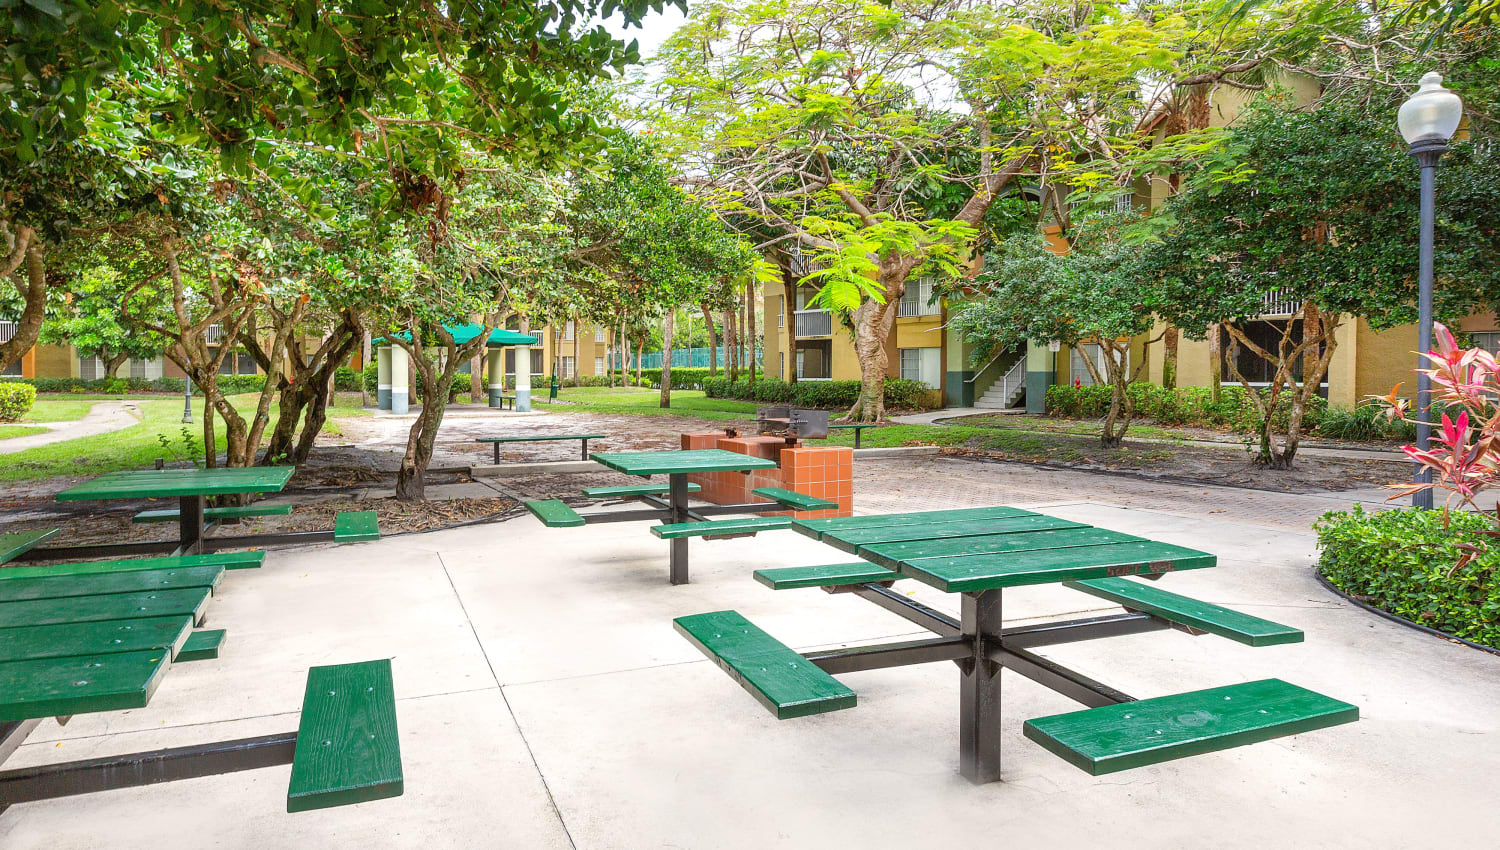 Barbecue area at Mosaic Apartments in Coral Springs, Florida